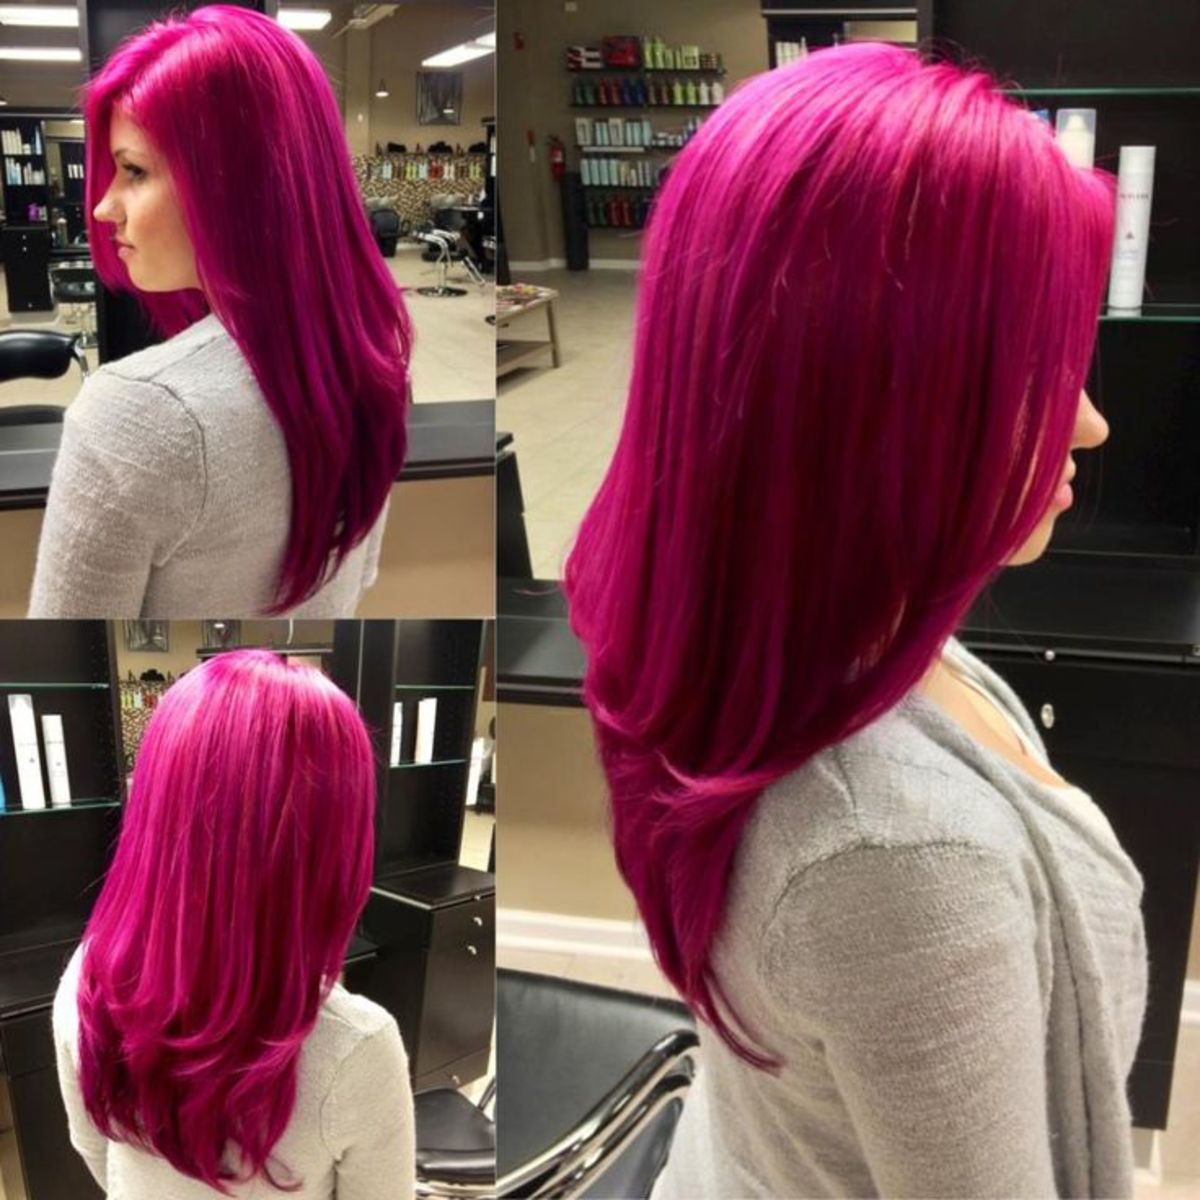 tips for pink hair? i wanted to dye my hair this color, but this would be  my first pastel color so i'm lost. any recommended dye? my natural hair is  dark brown,